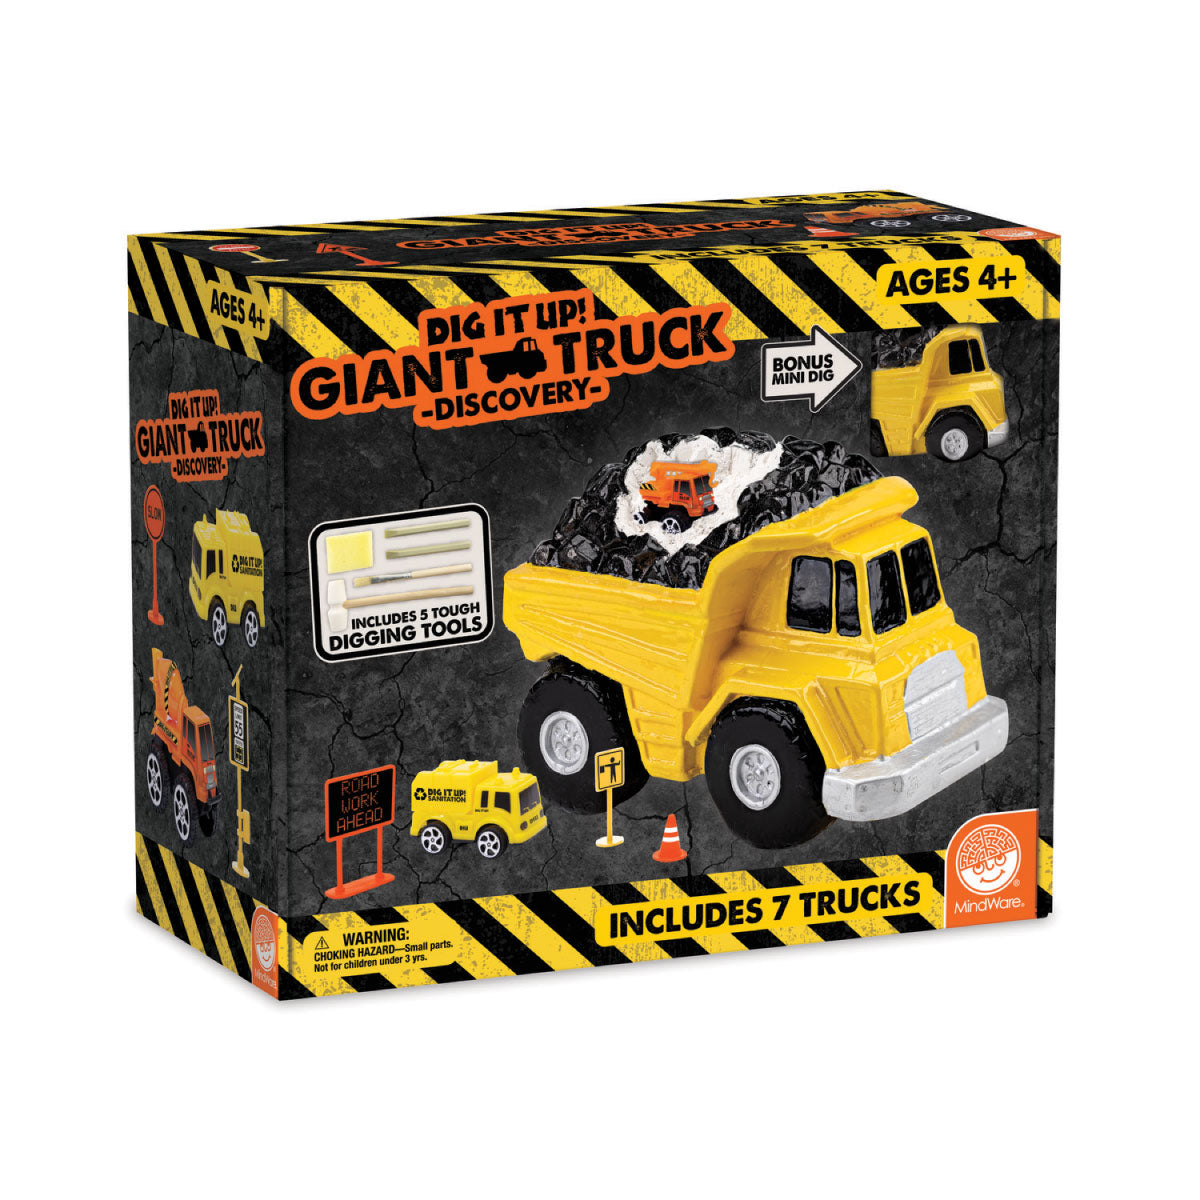 Mindware Dig It Up! Giant Truck Discovery